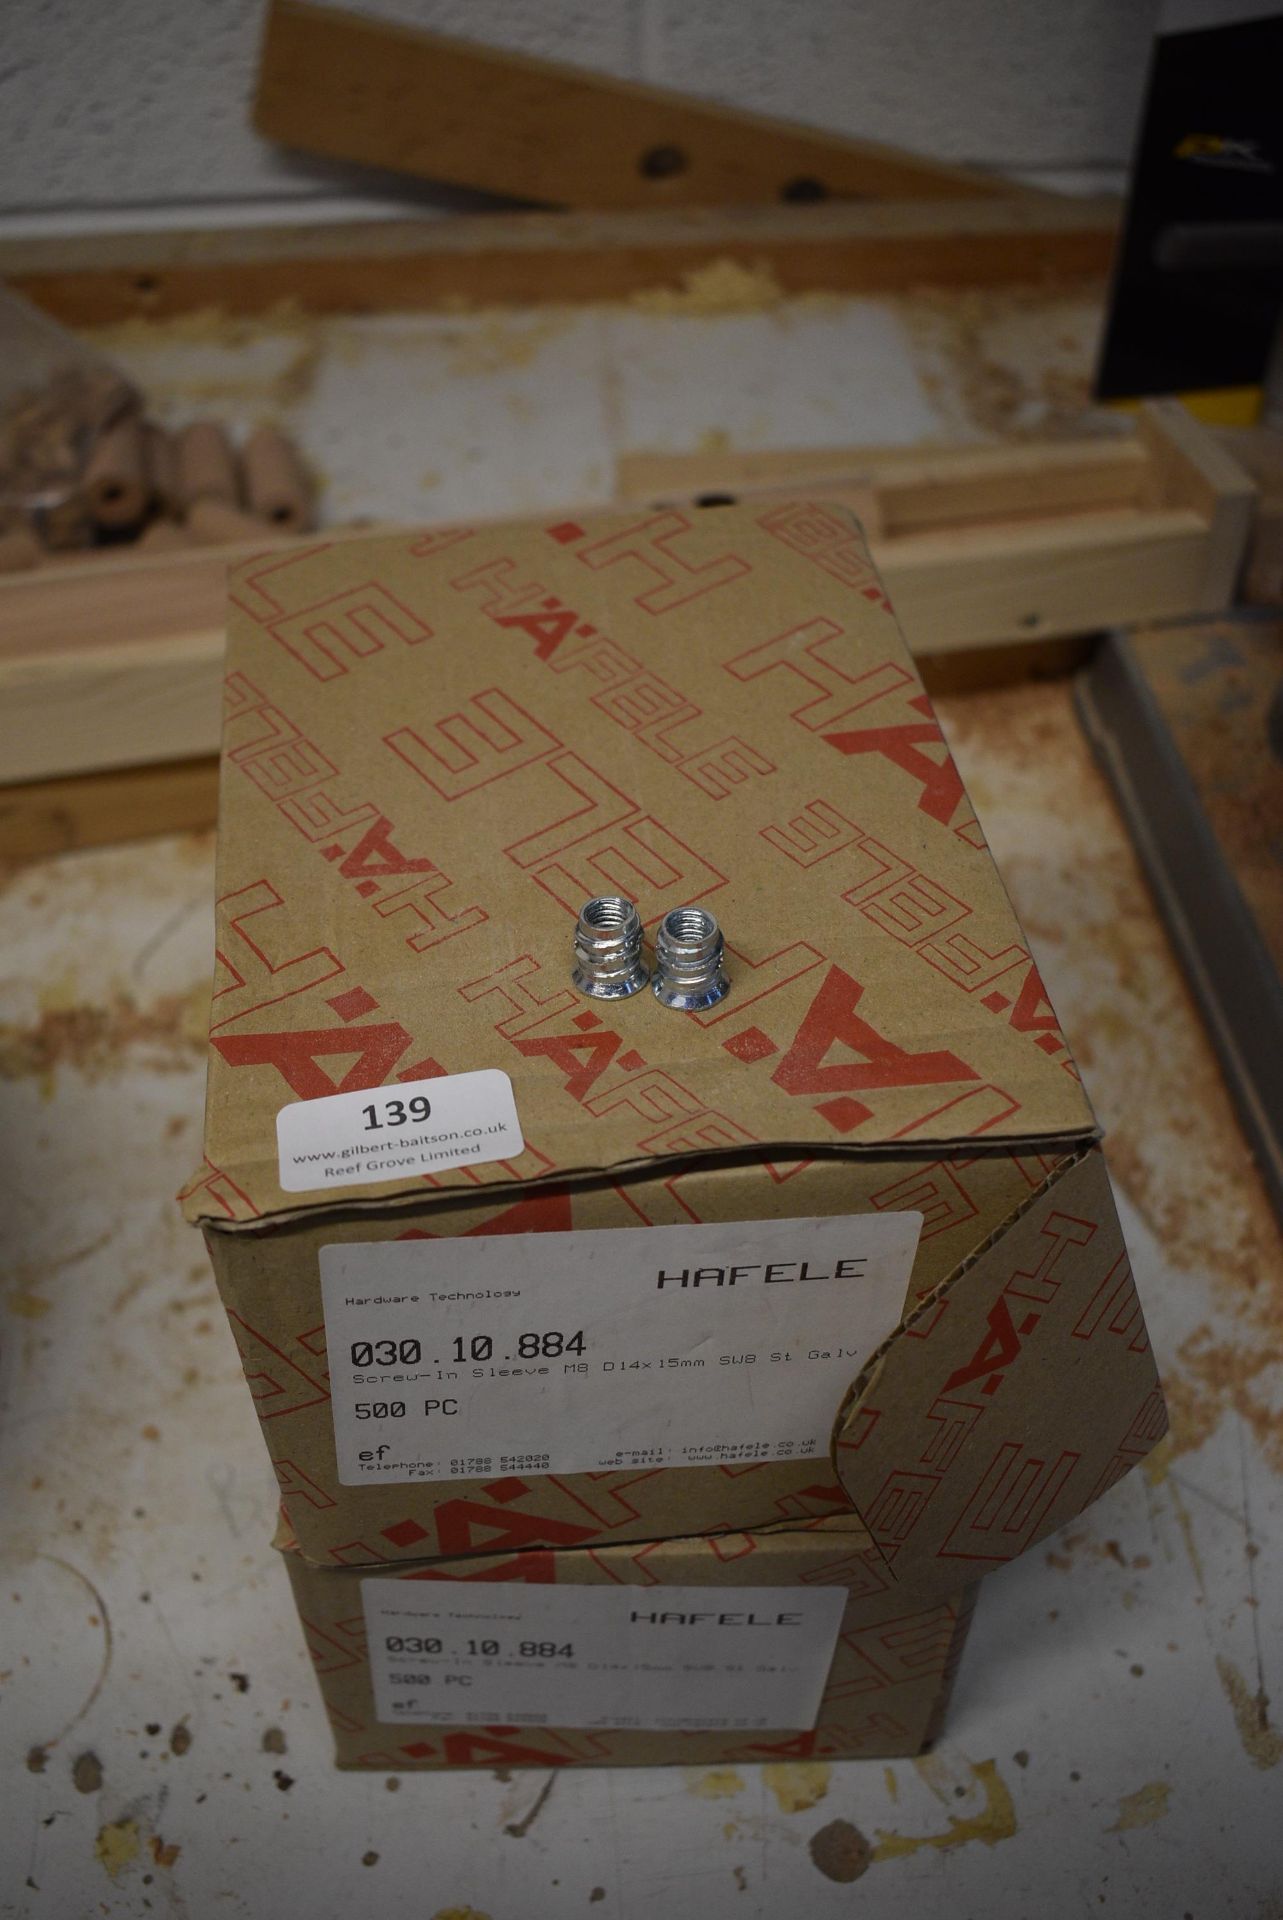 *Two Part Boxes of Hafele M8 Captive Nuts